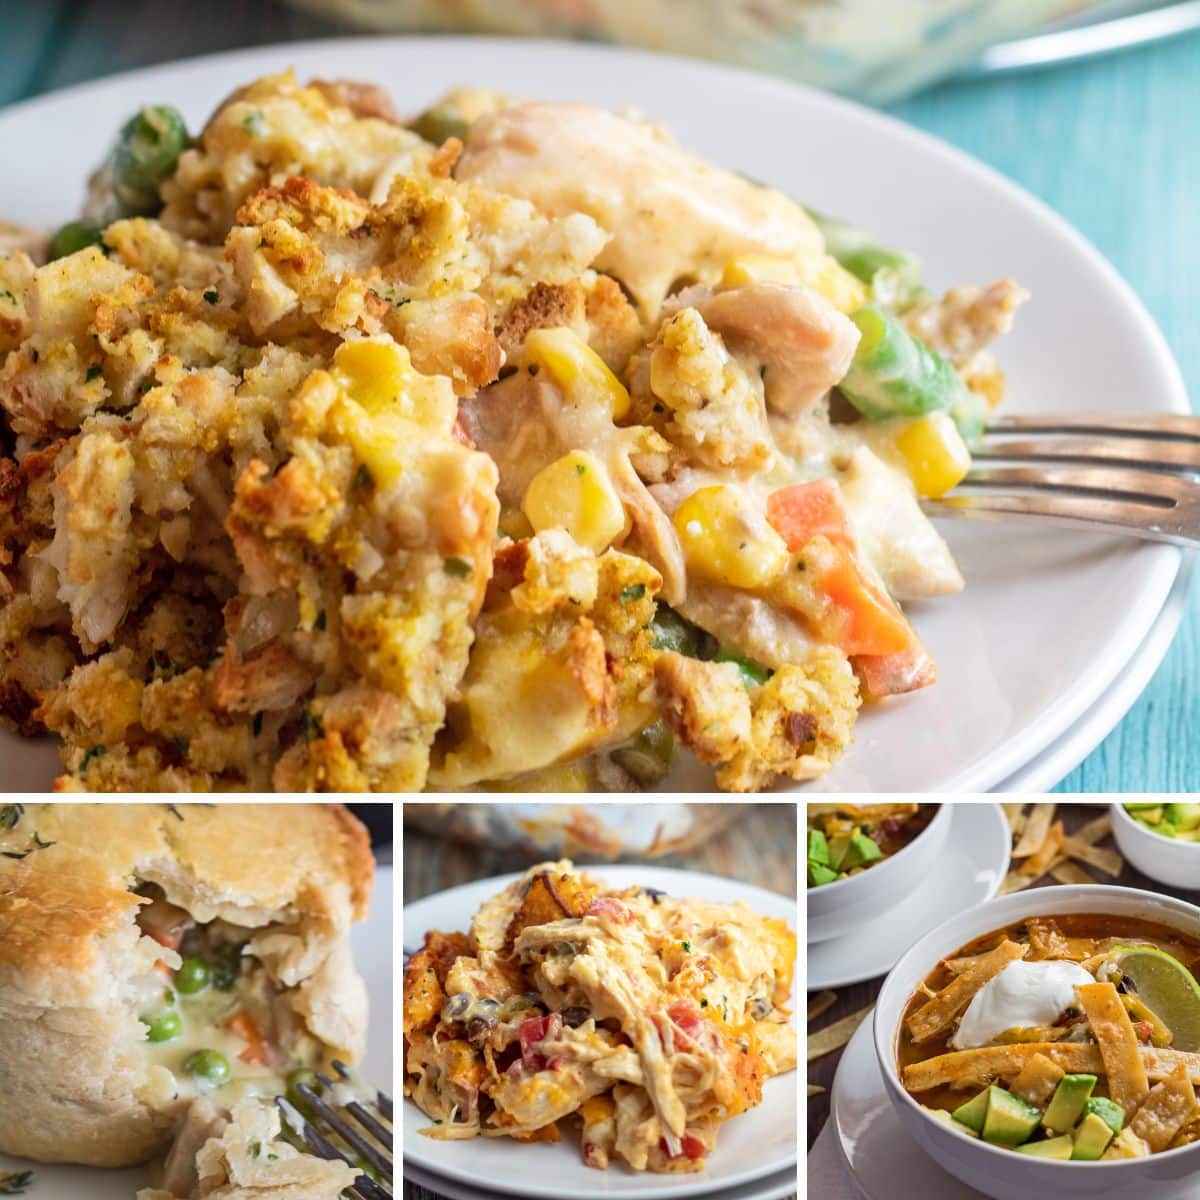 Best leftover chicken recipes to make any day of the week featuring 4 tasty recipes to try.